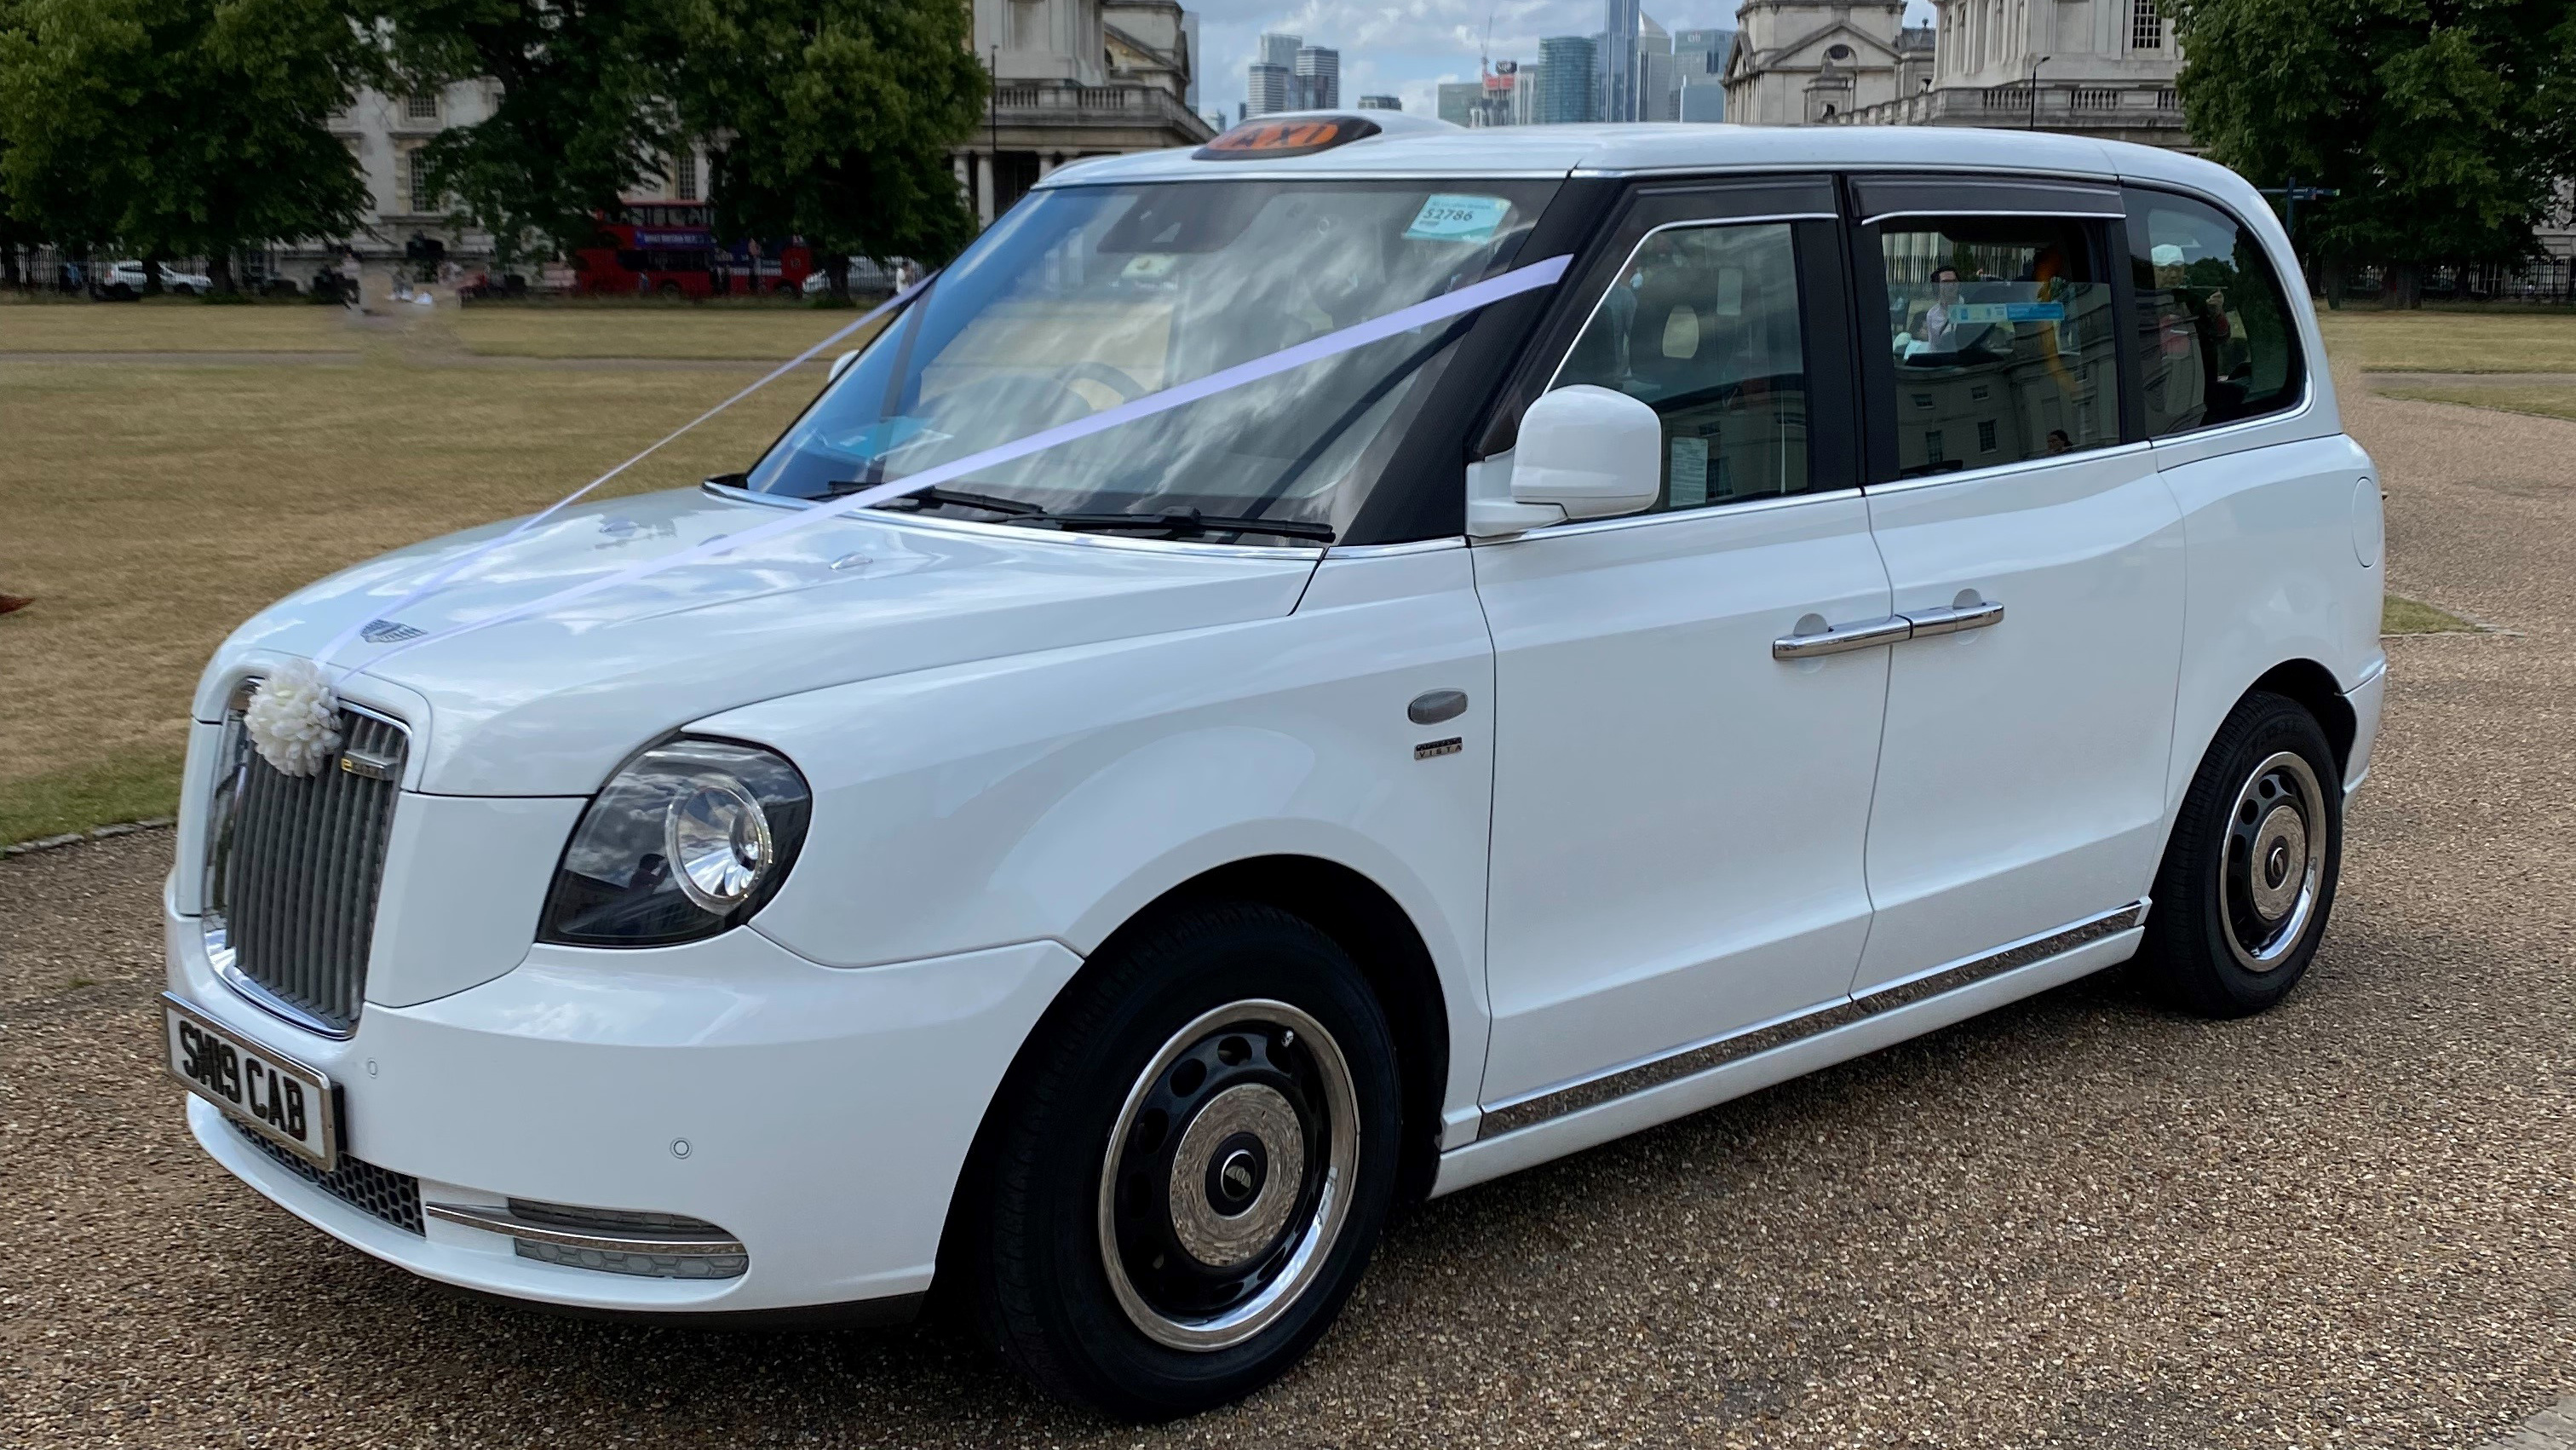 Taxi Cab - 100% Electric wedding car for hire in Uxbridge, London